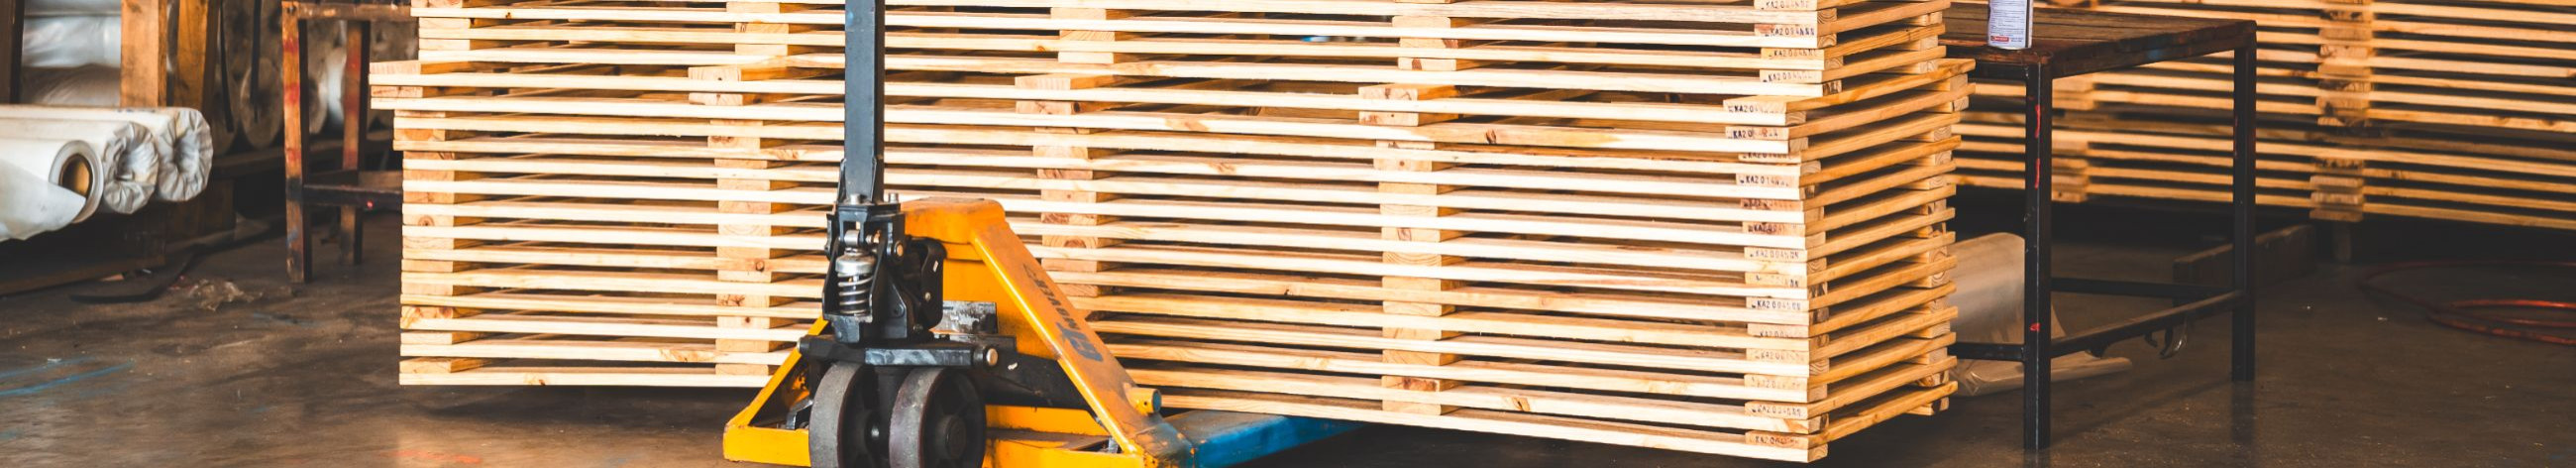 We provide a comprehensive range of woodware products and services, including the manufacture and supply of pallets and custom packaging solutions.